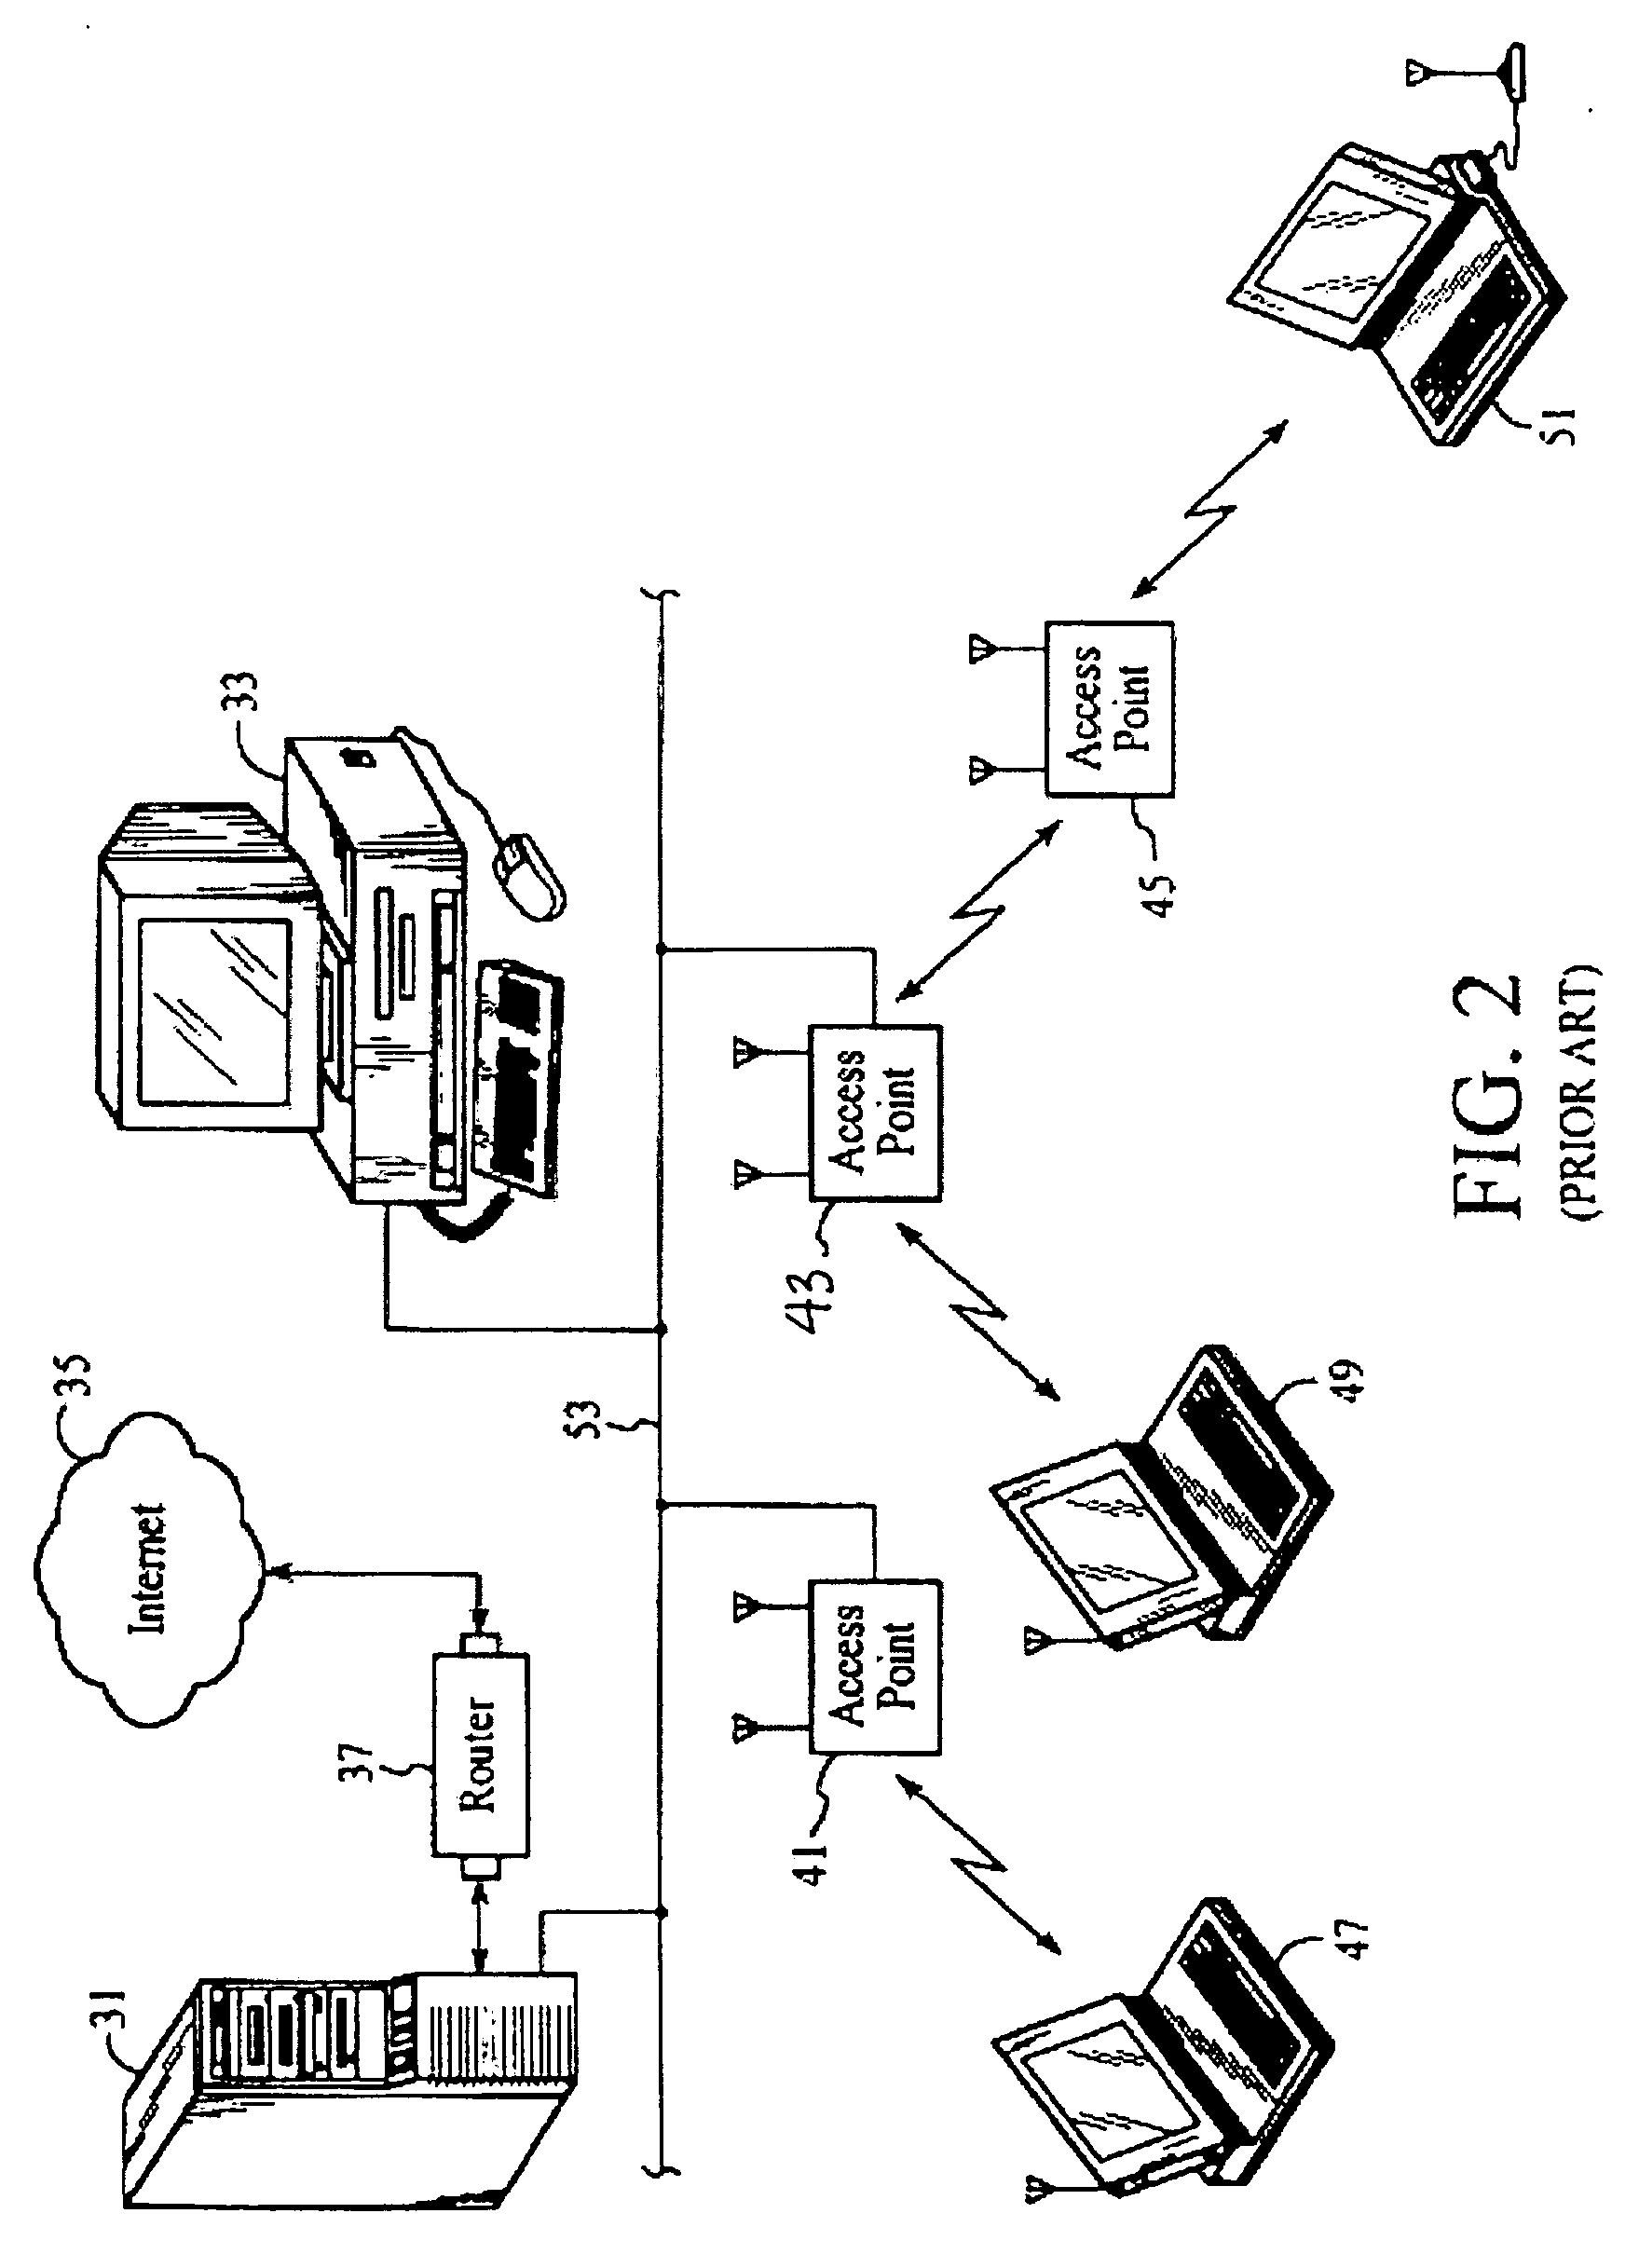 System and Method for Distributed Network Authentication and Access Control